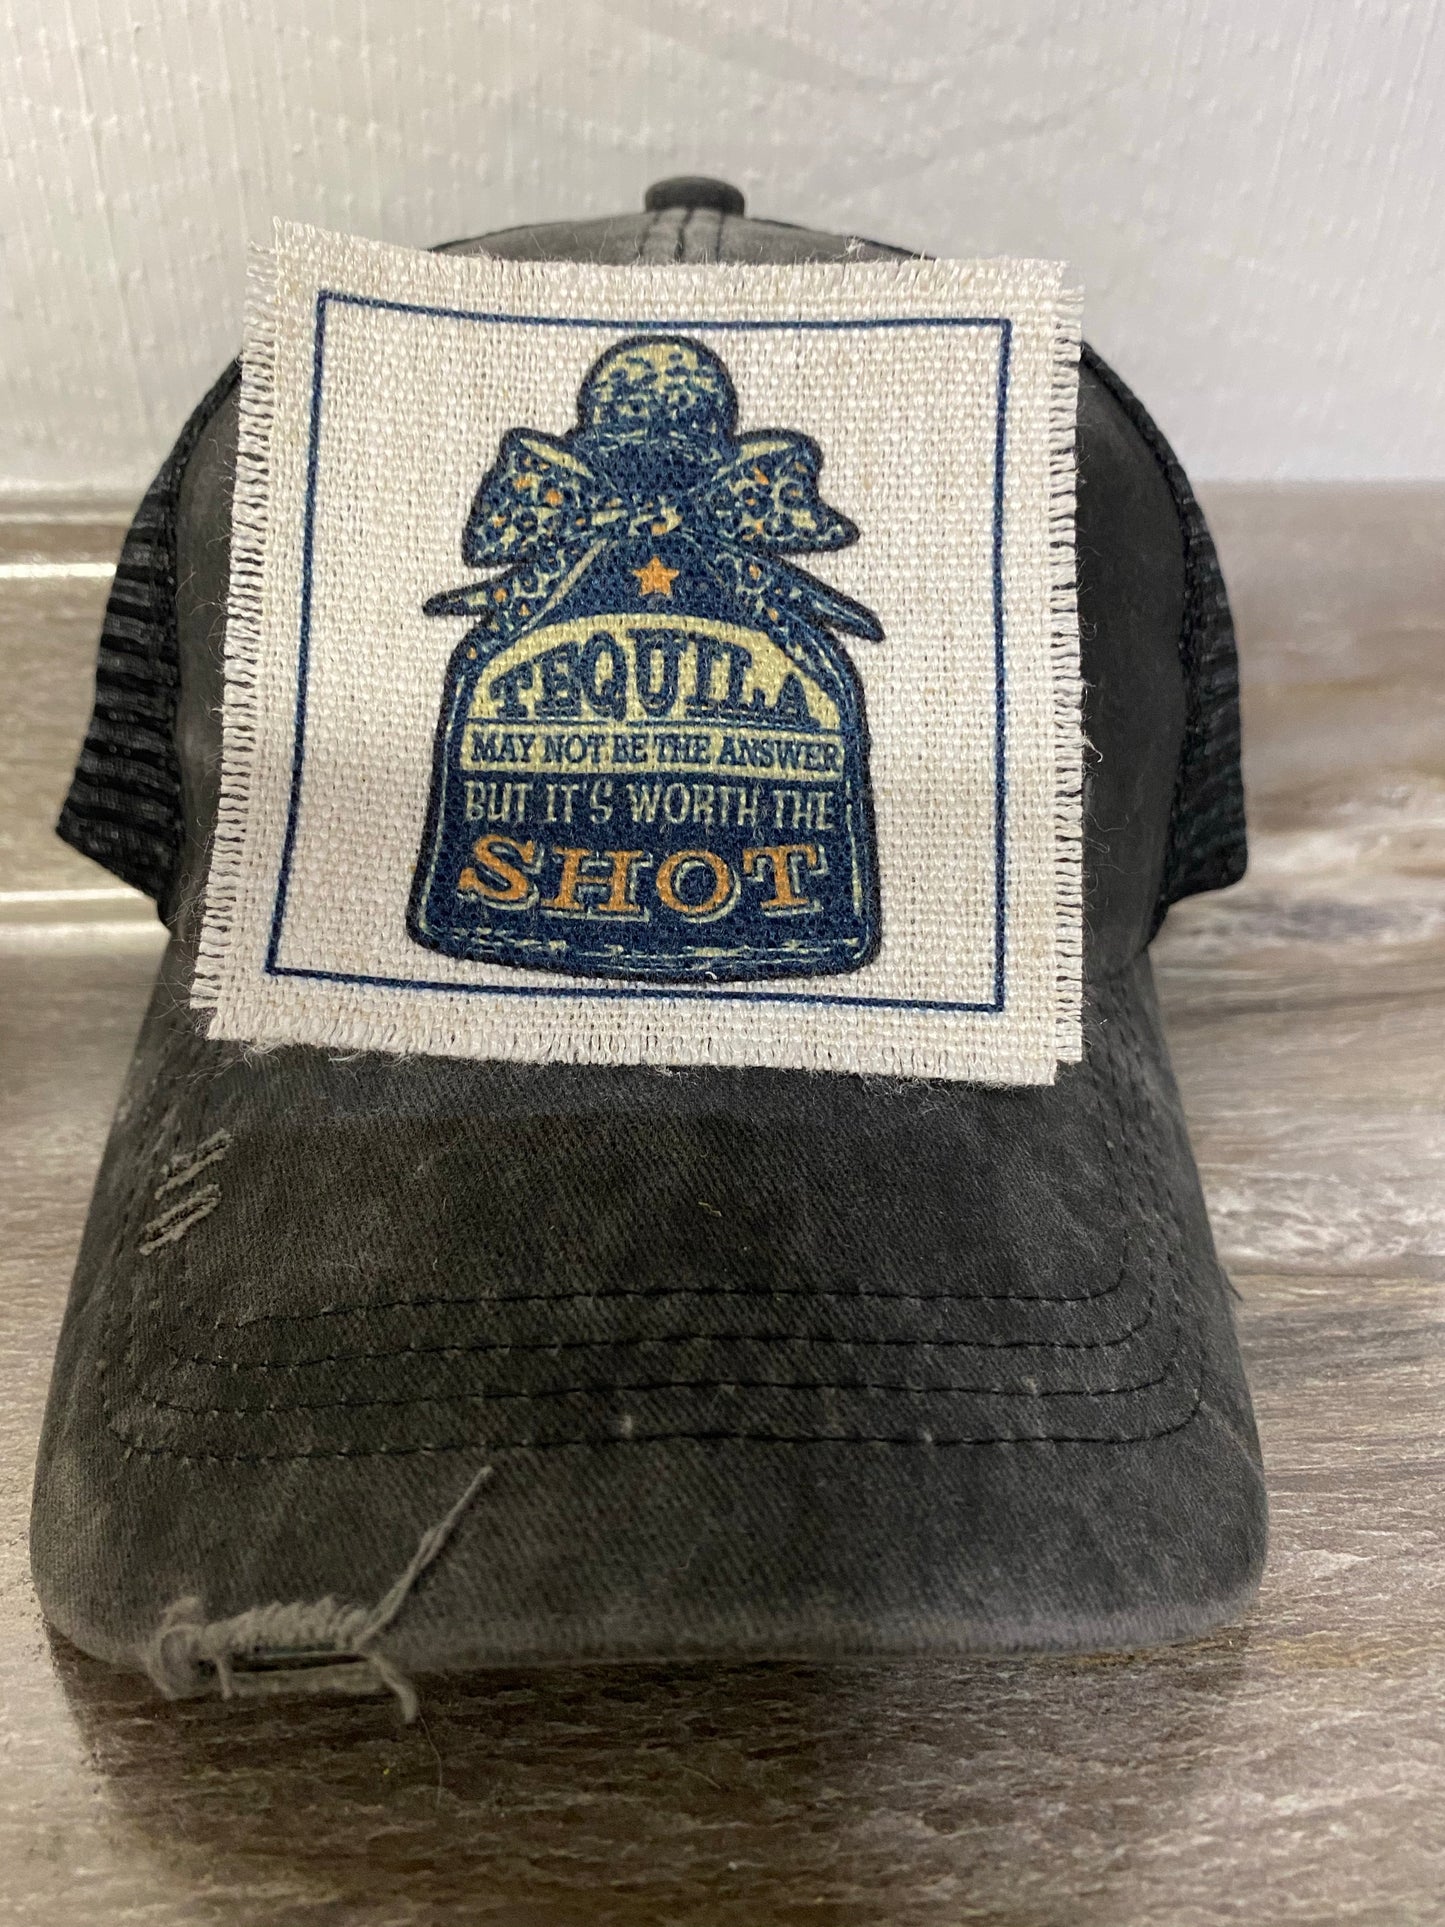 Tequila May Not Be The Answer But It's Worth The Shot Hat Patch